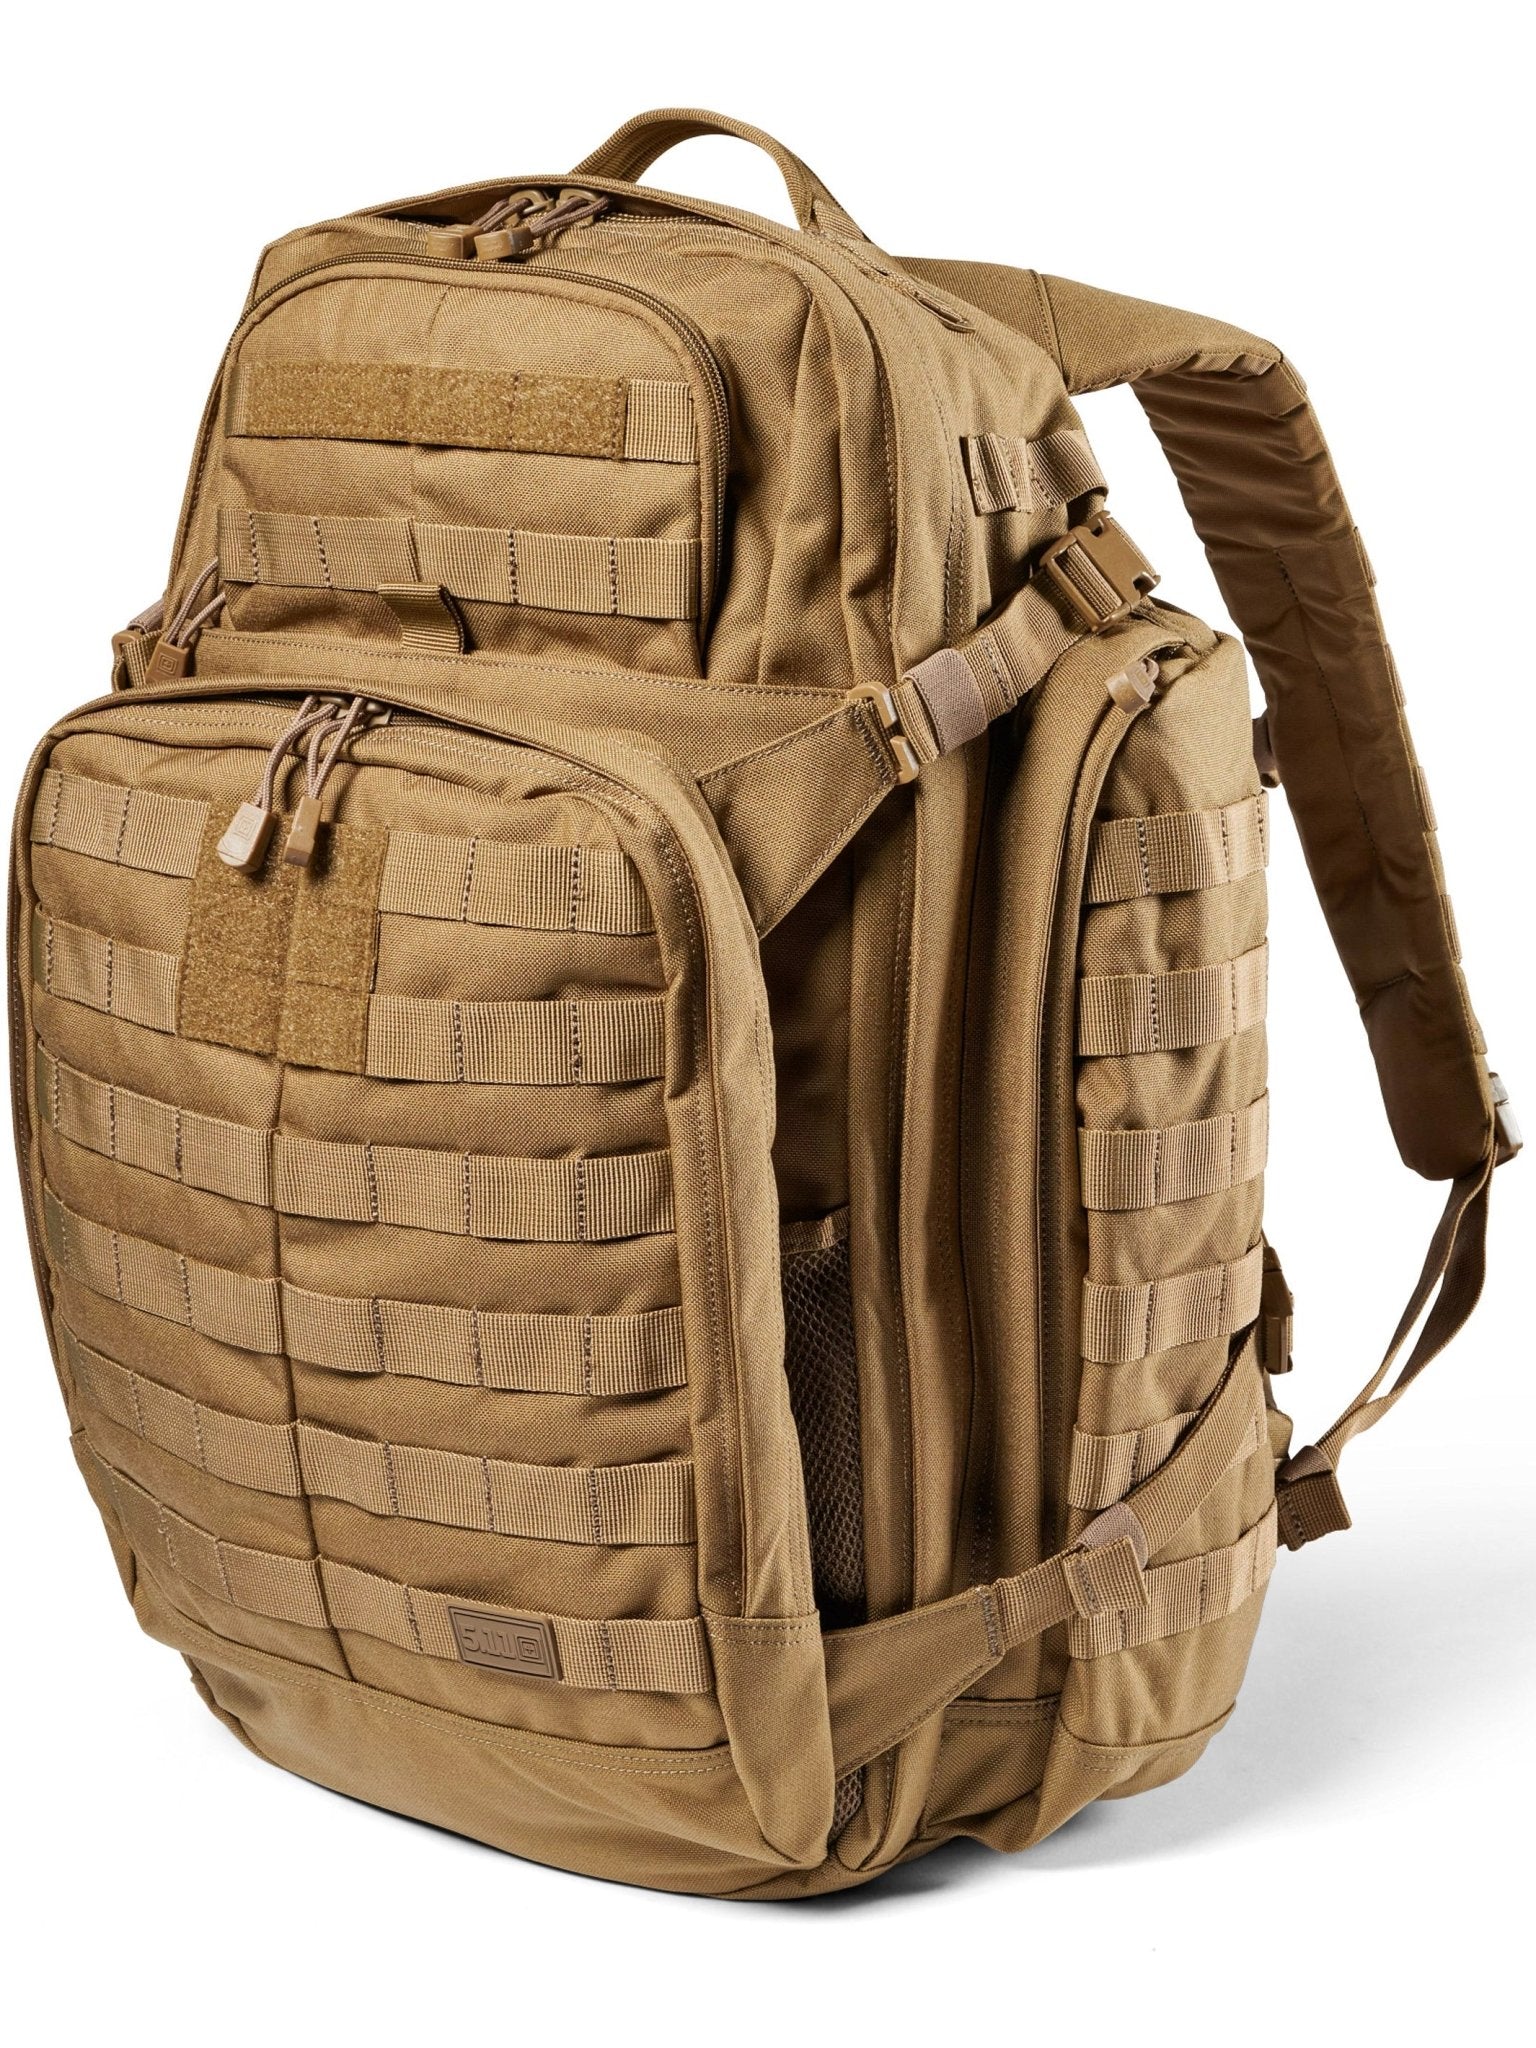 4elementsclothing5.11 Tactical5.11 Tactical - 5.11 Tactical Rush 72 2.0 Backpack - Style 56565Bag56565-134